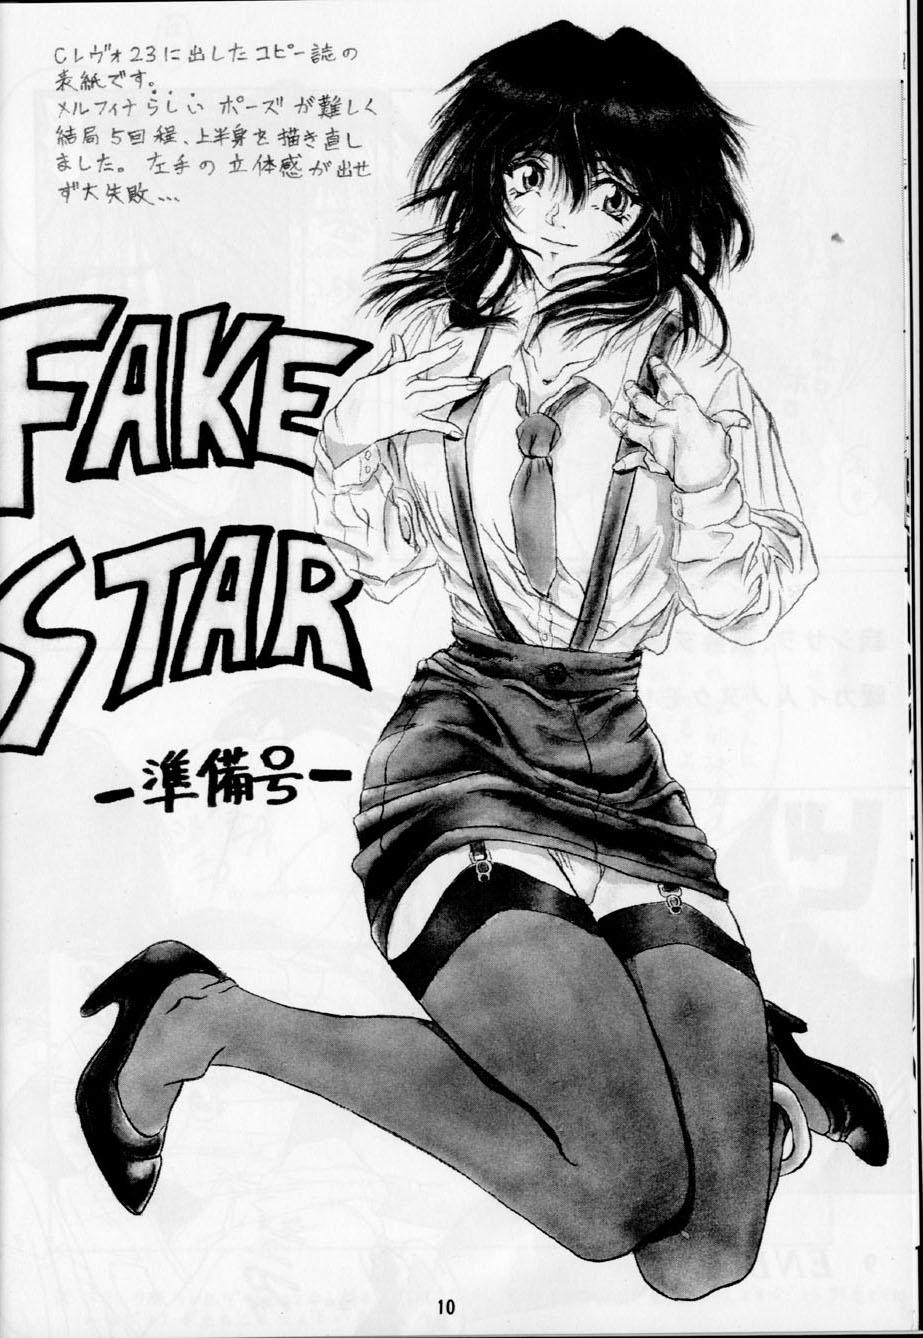 Teen Porn Fake Star - Outlaw star British - Page 9